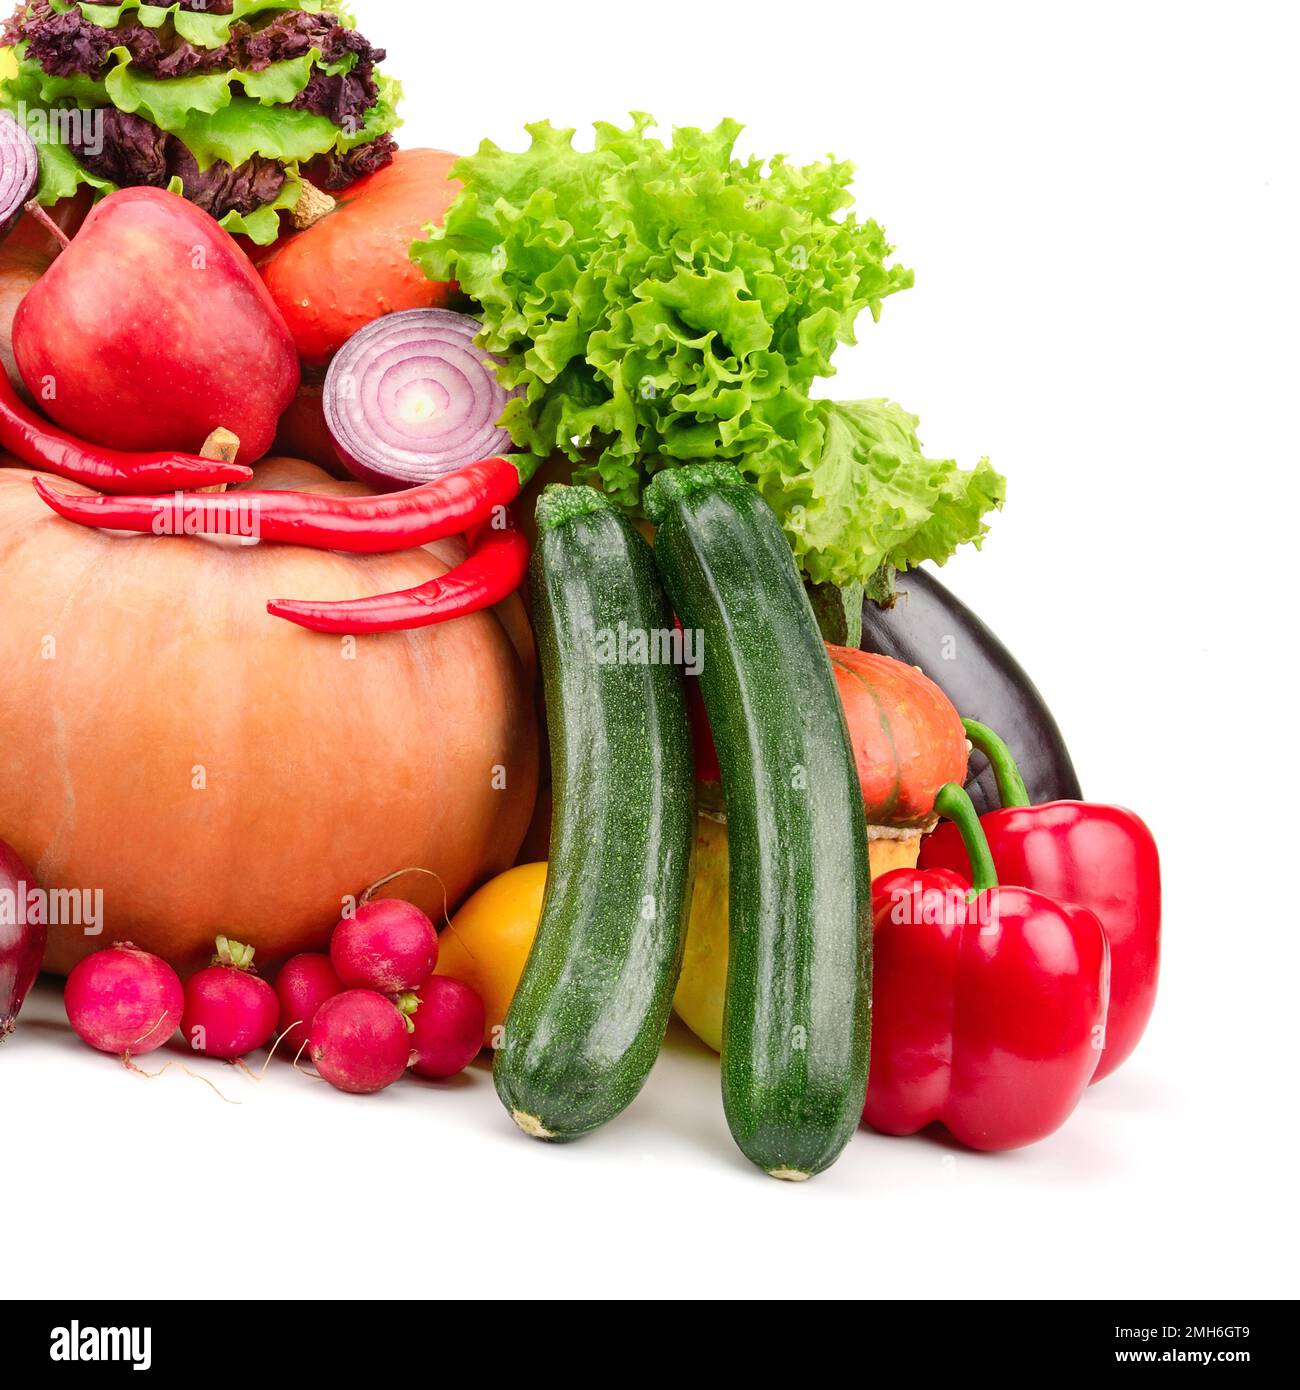 fresh fruits and vegetables isolated on white background Stock Photo